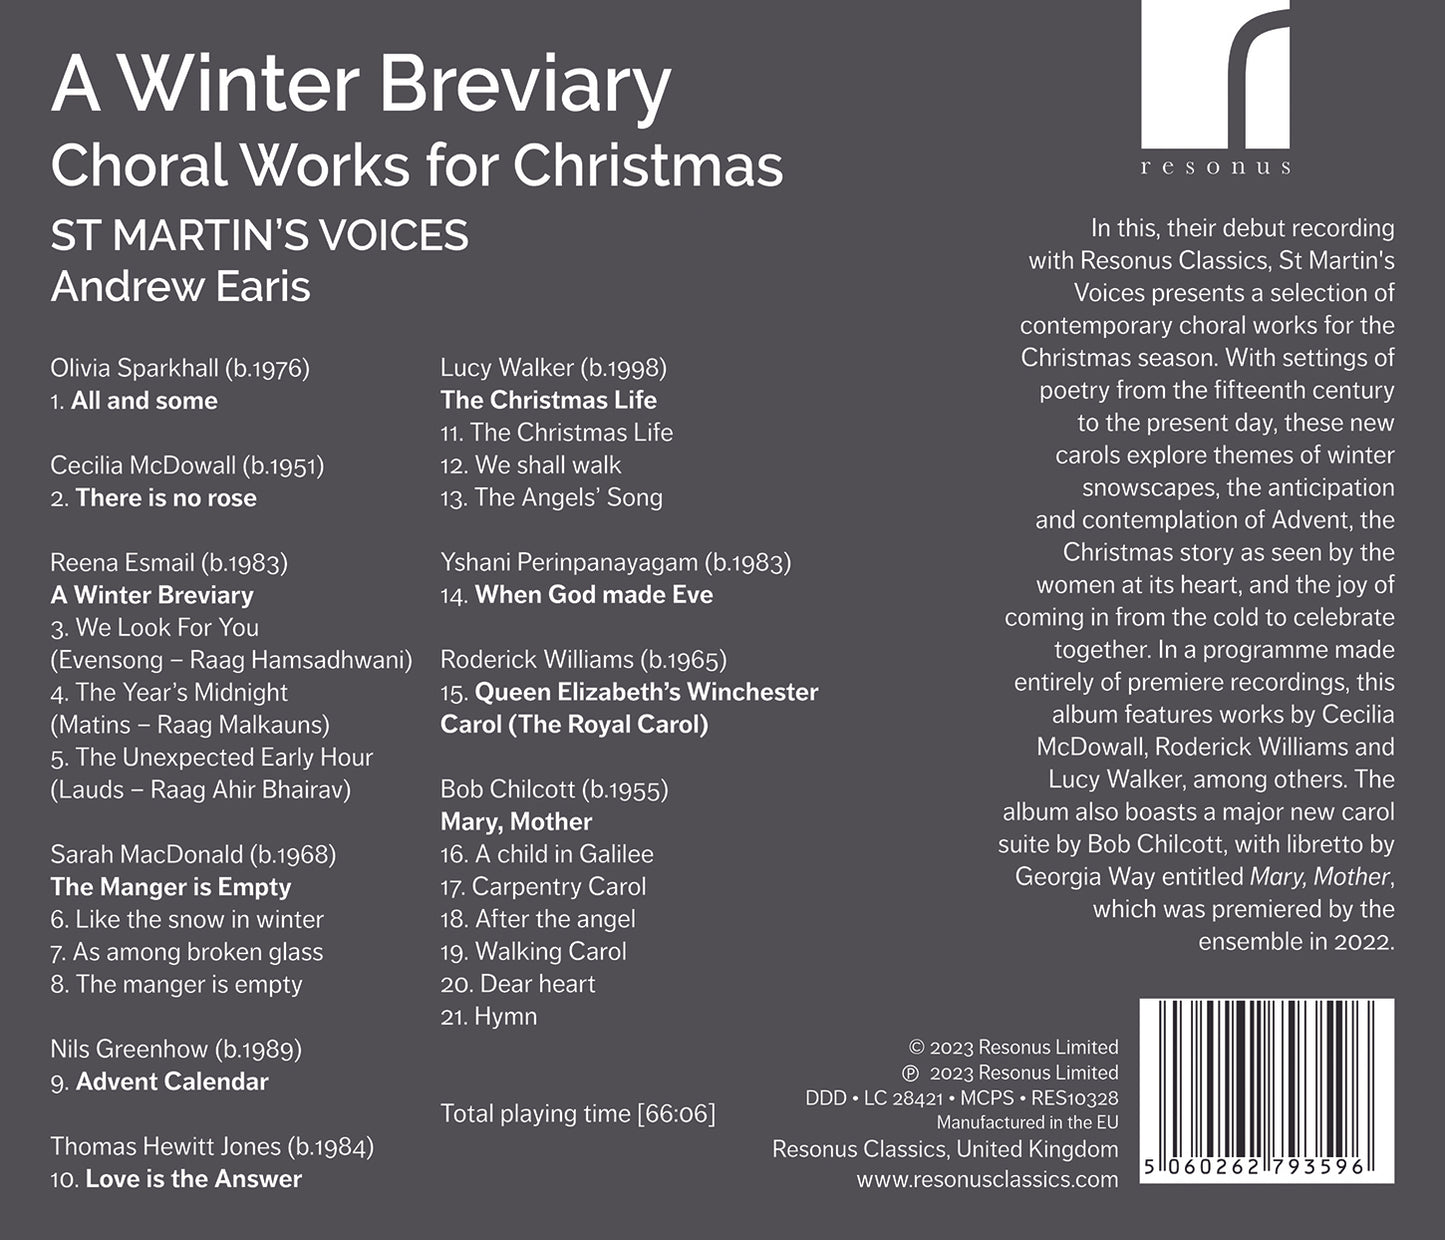 A Winter Breviary - Choral Music for Christmas